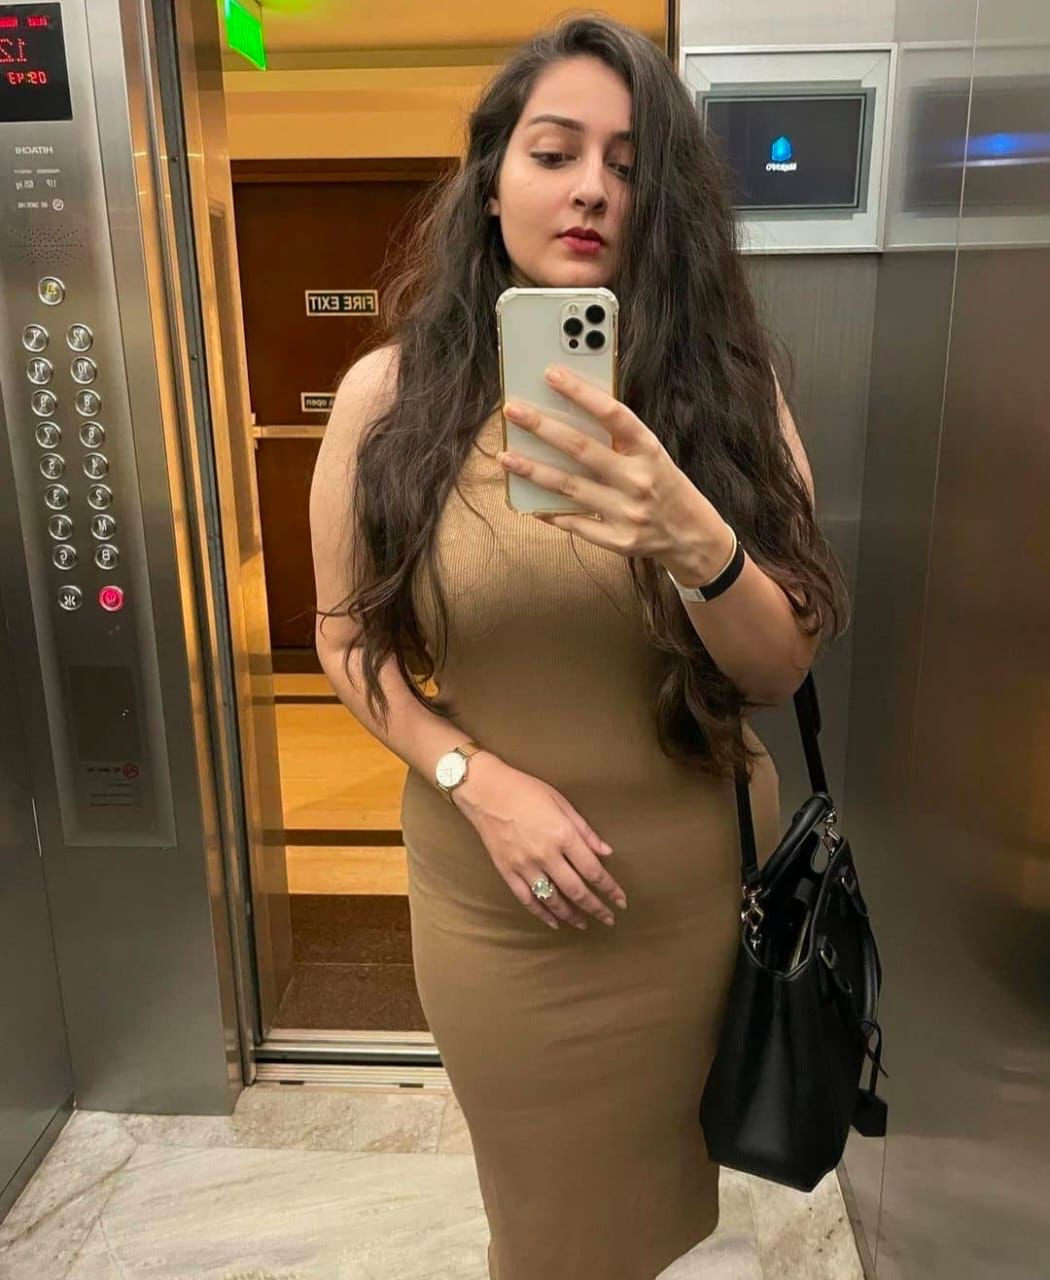 Gandhidham BEST SAFE AND GENINUE VIP LOW BUDGET CALL GIRL CALL ME 